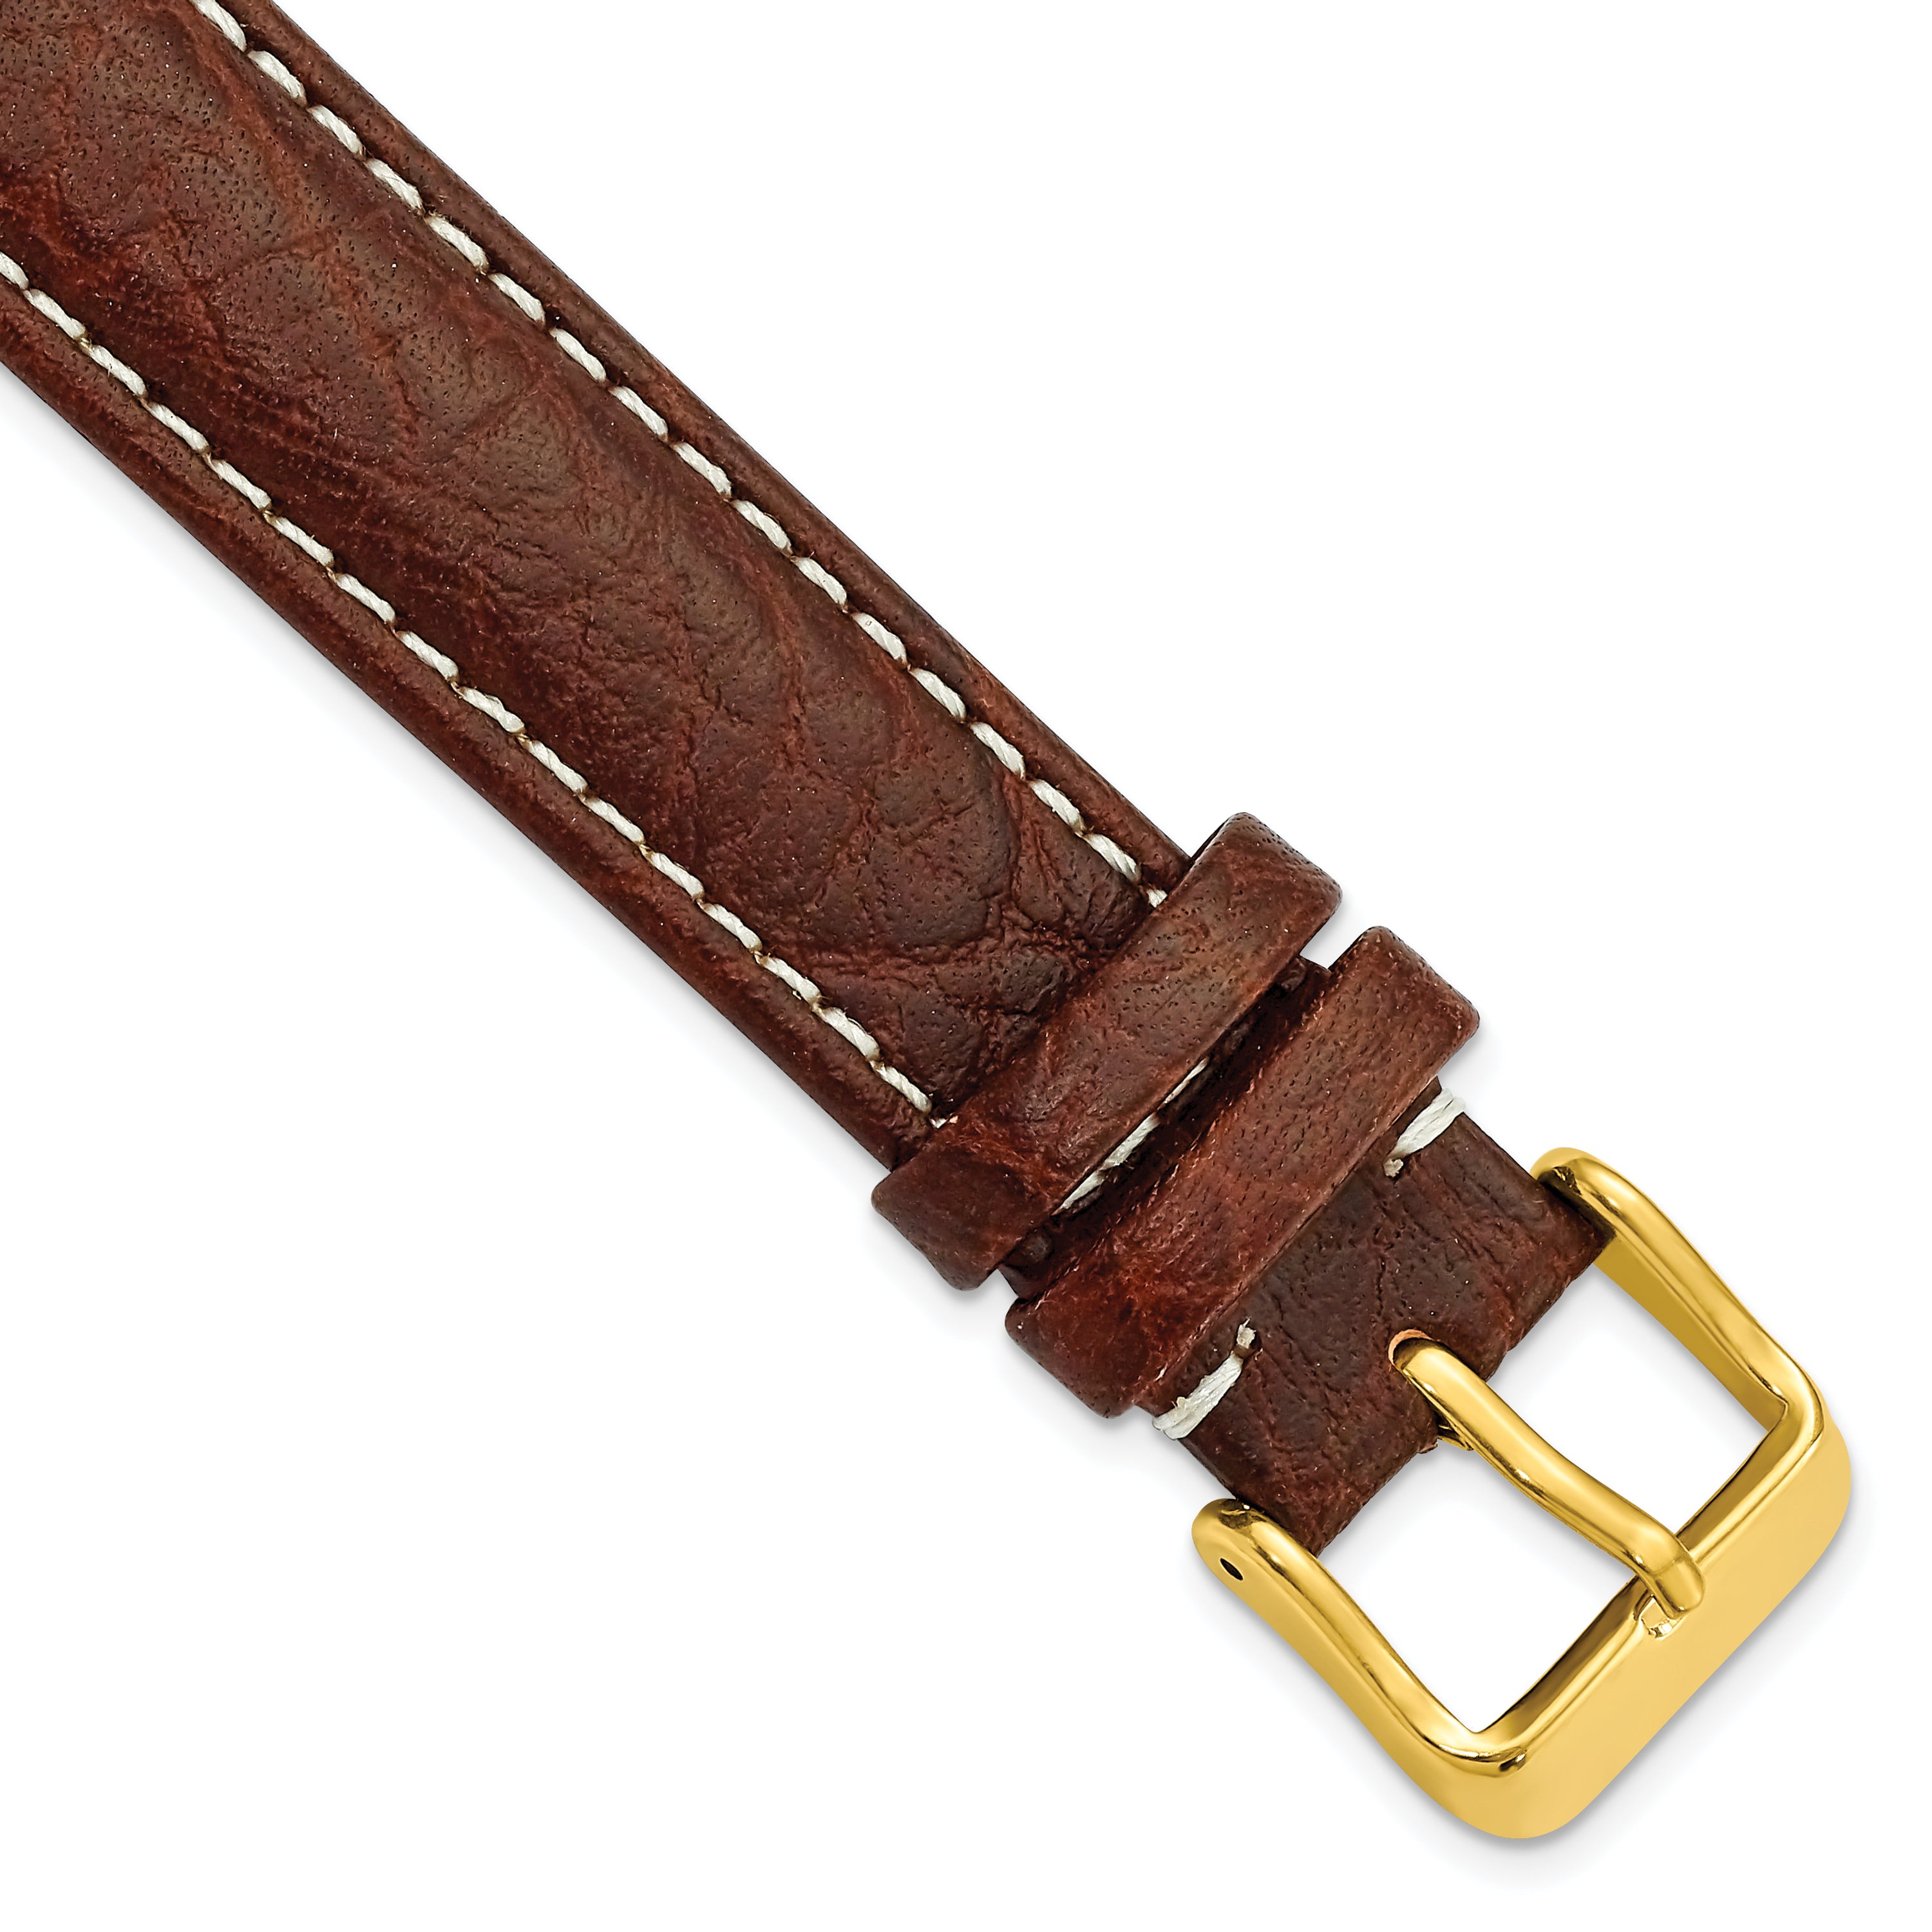 DeBeer 17mm Dark Brown Sport Leather with White Stitching and Gold-tone Buckle 7.5 inch Watch Band